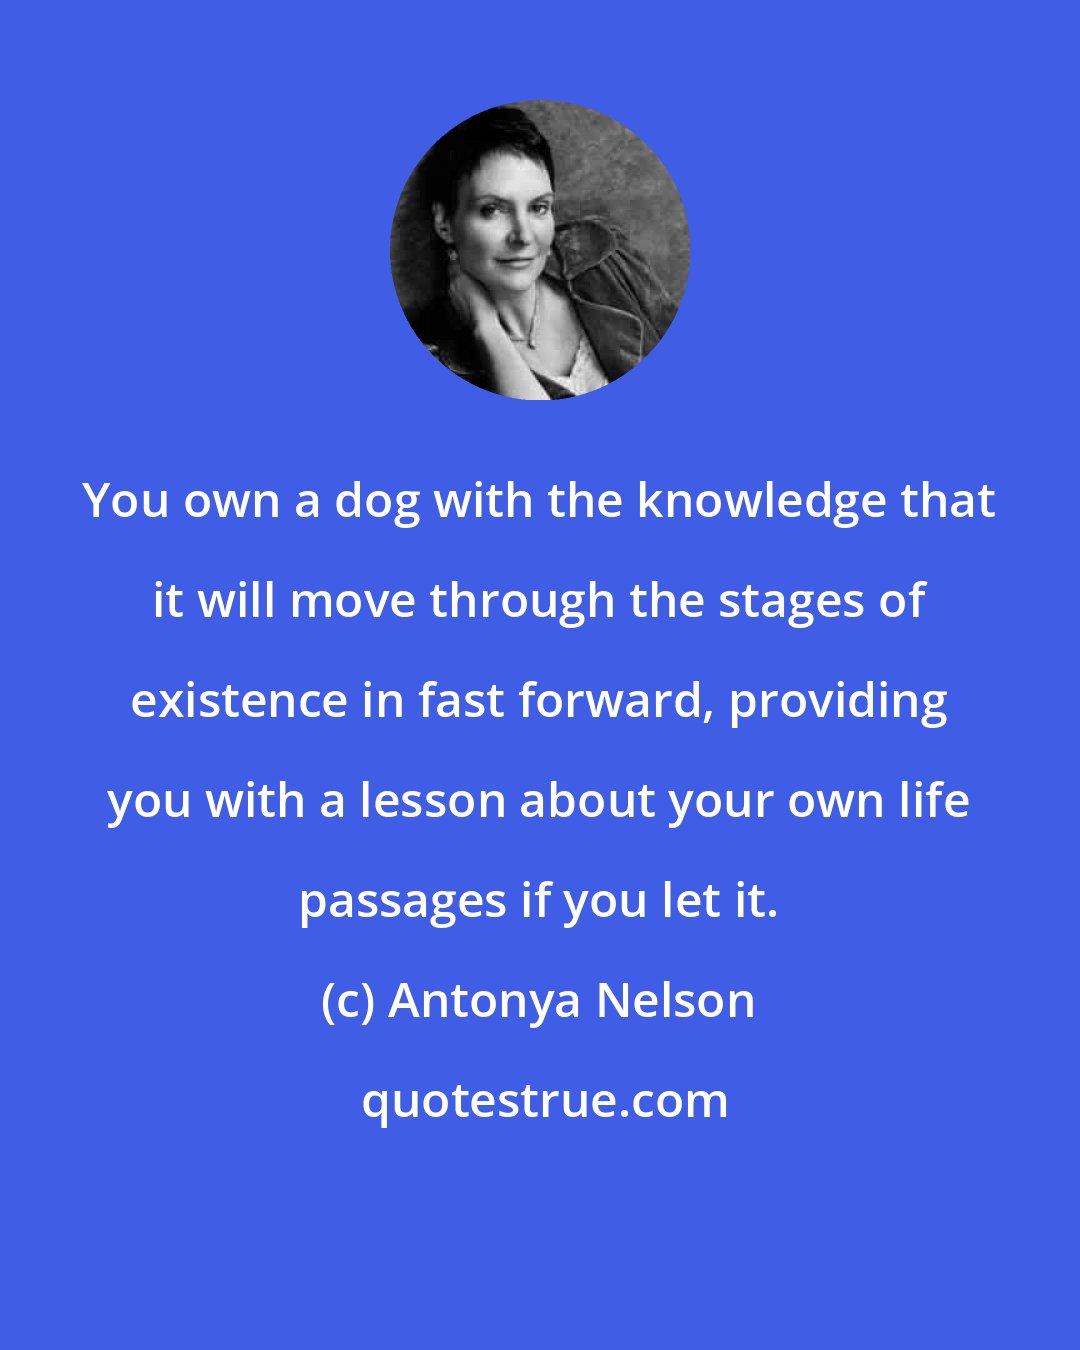 Antonya Nelson: You own a dog with the knowledge that it will move through the stages of existence in fast forward, providing you with a lesson about your own life passages if you let it.